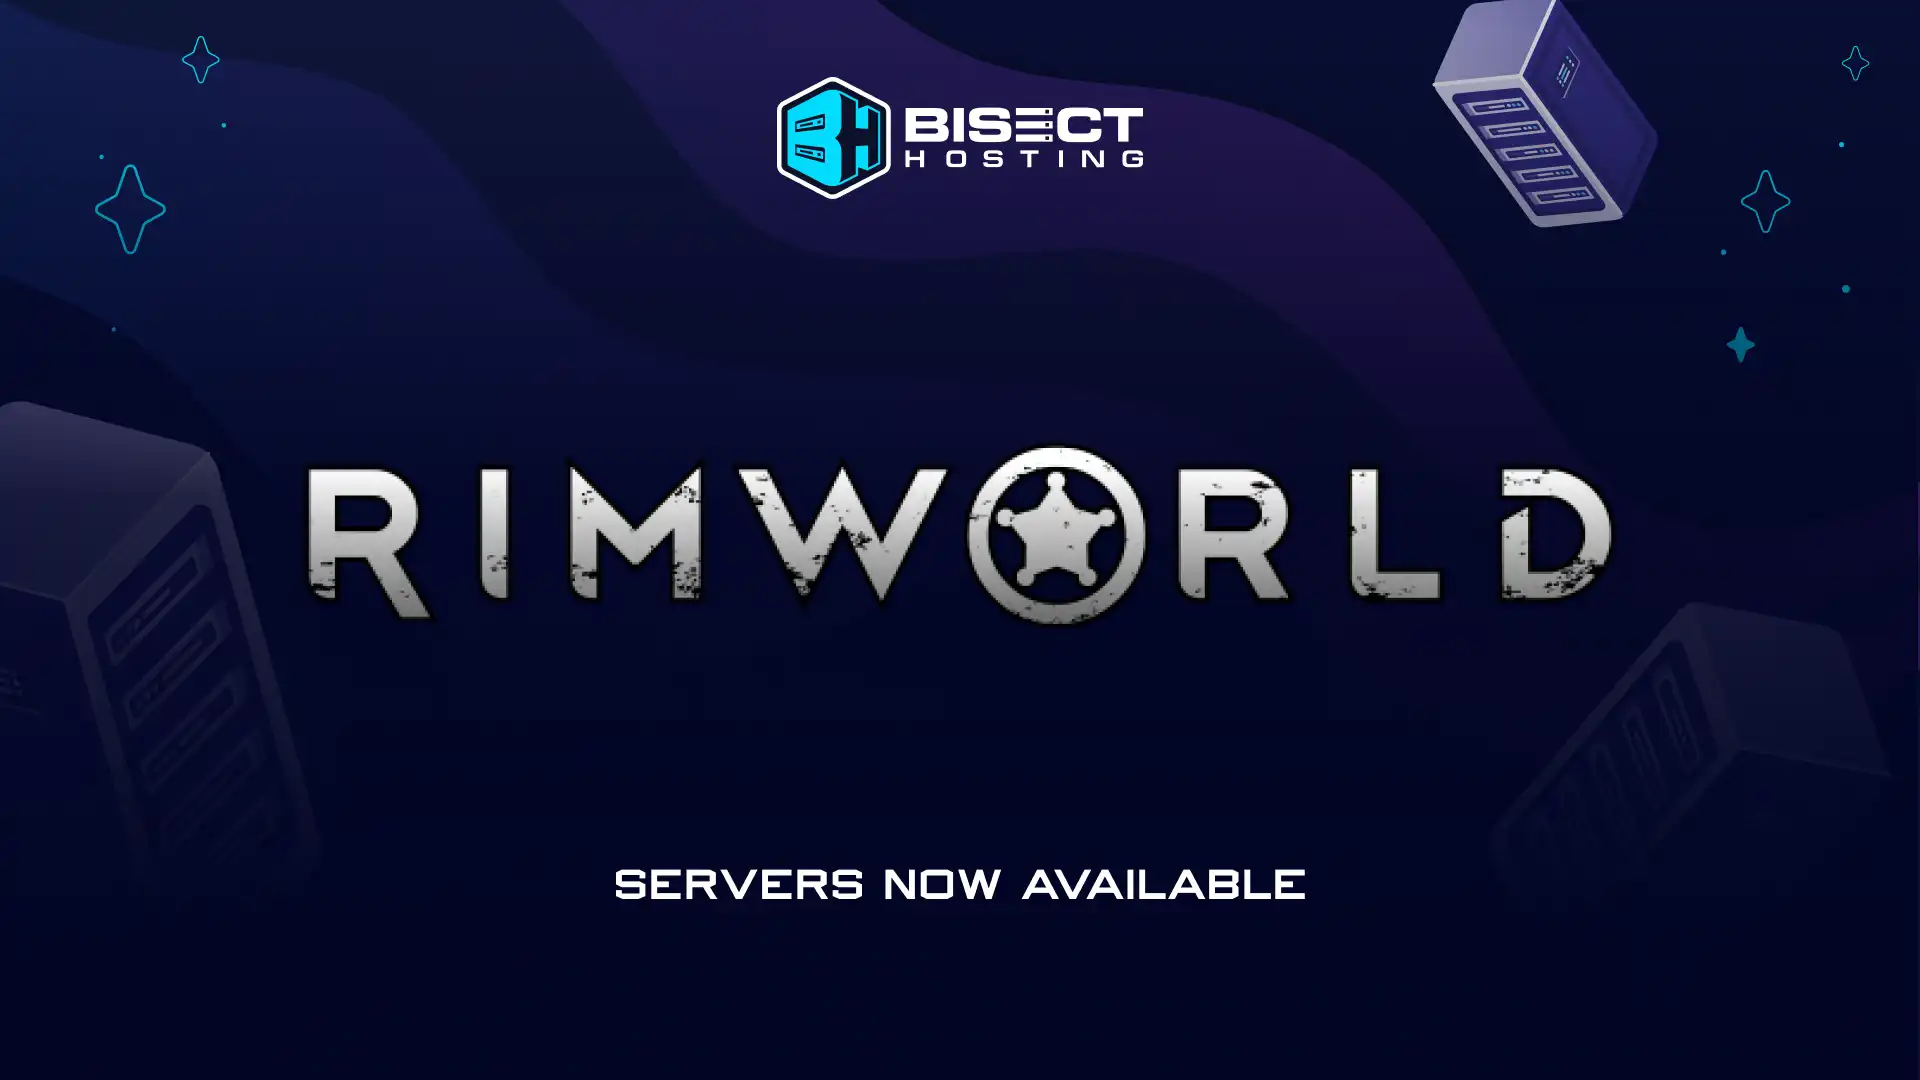 RimWorld Together Dedicated Server Hosting Available Now With BisectHosting